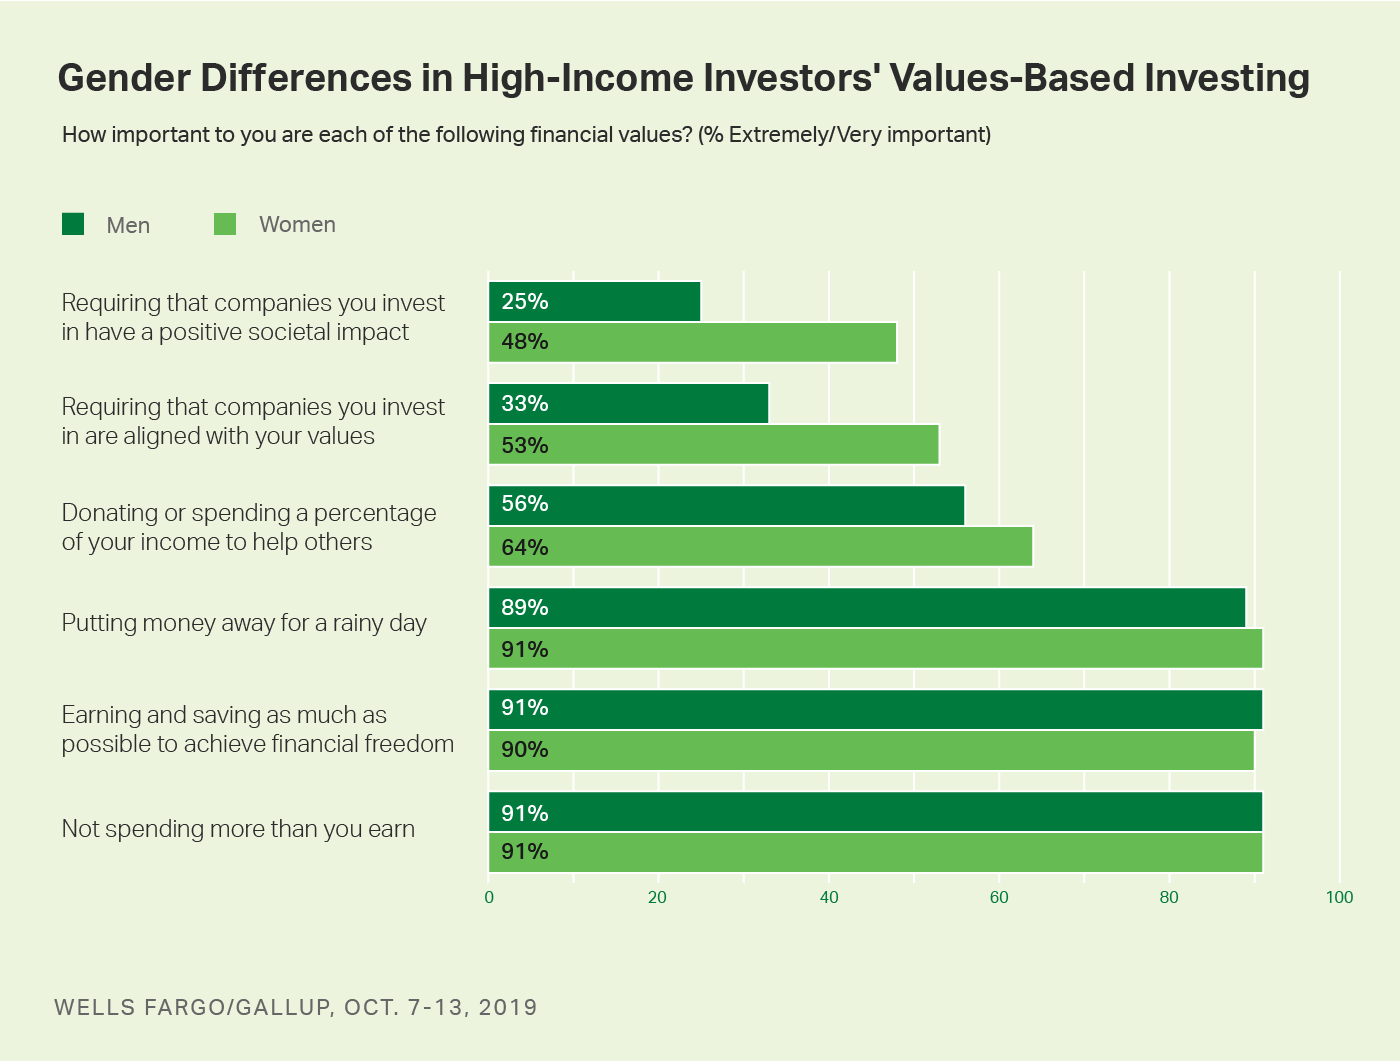 Bar chart. Gender differences in upper-income investors’ values-based investing.